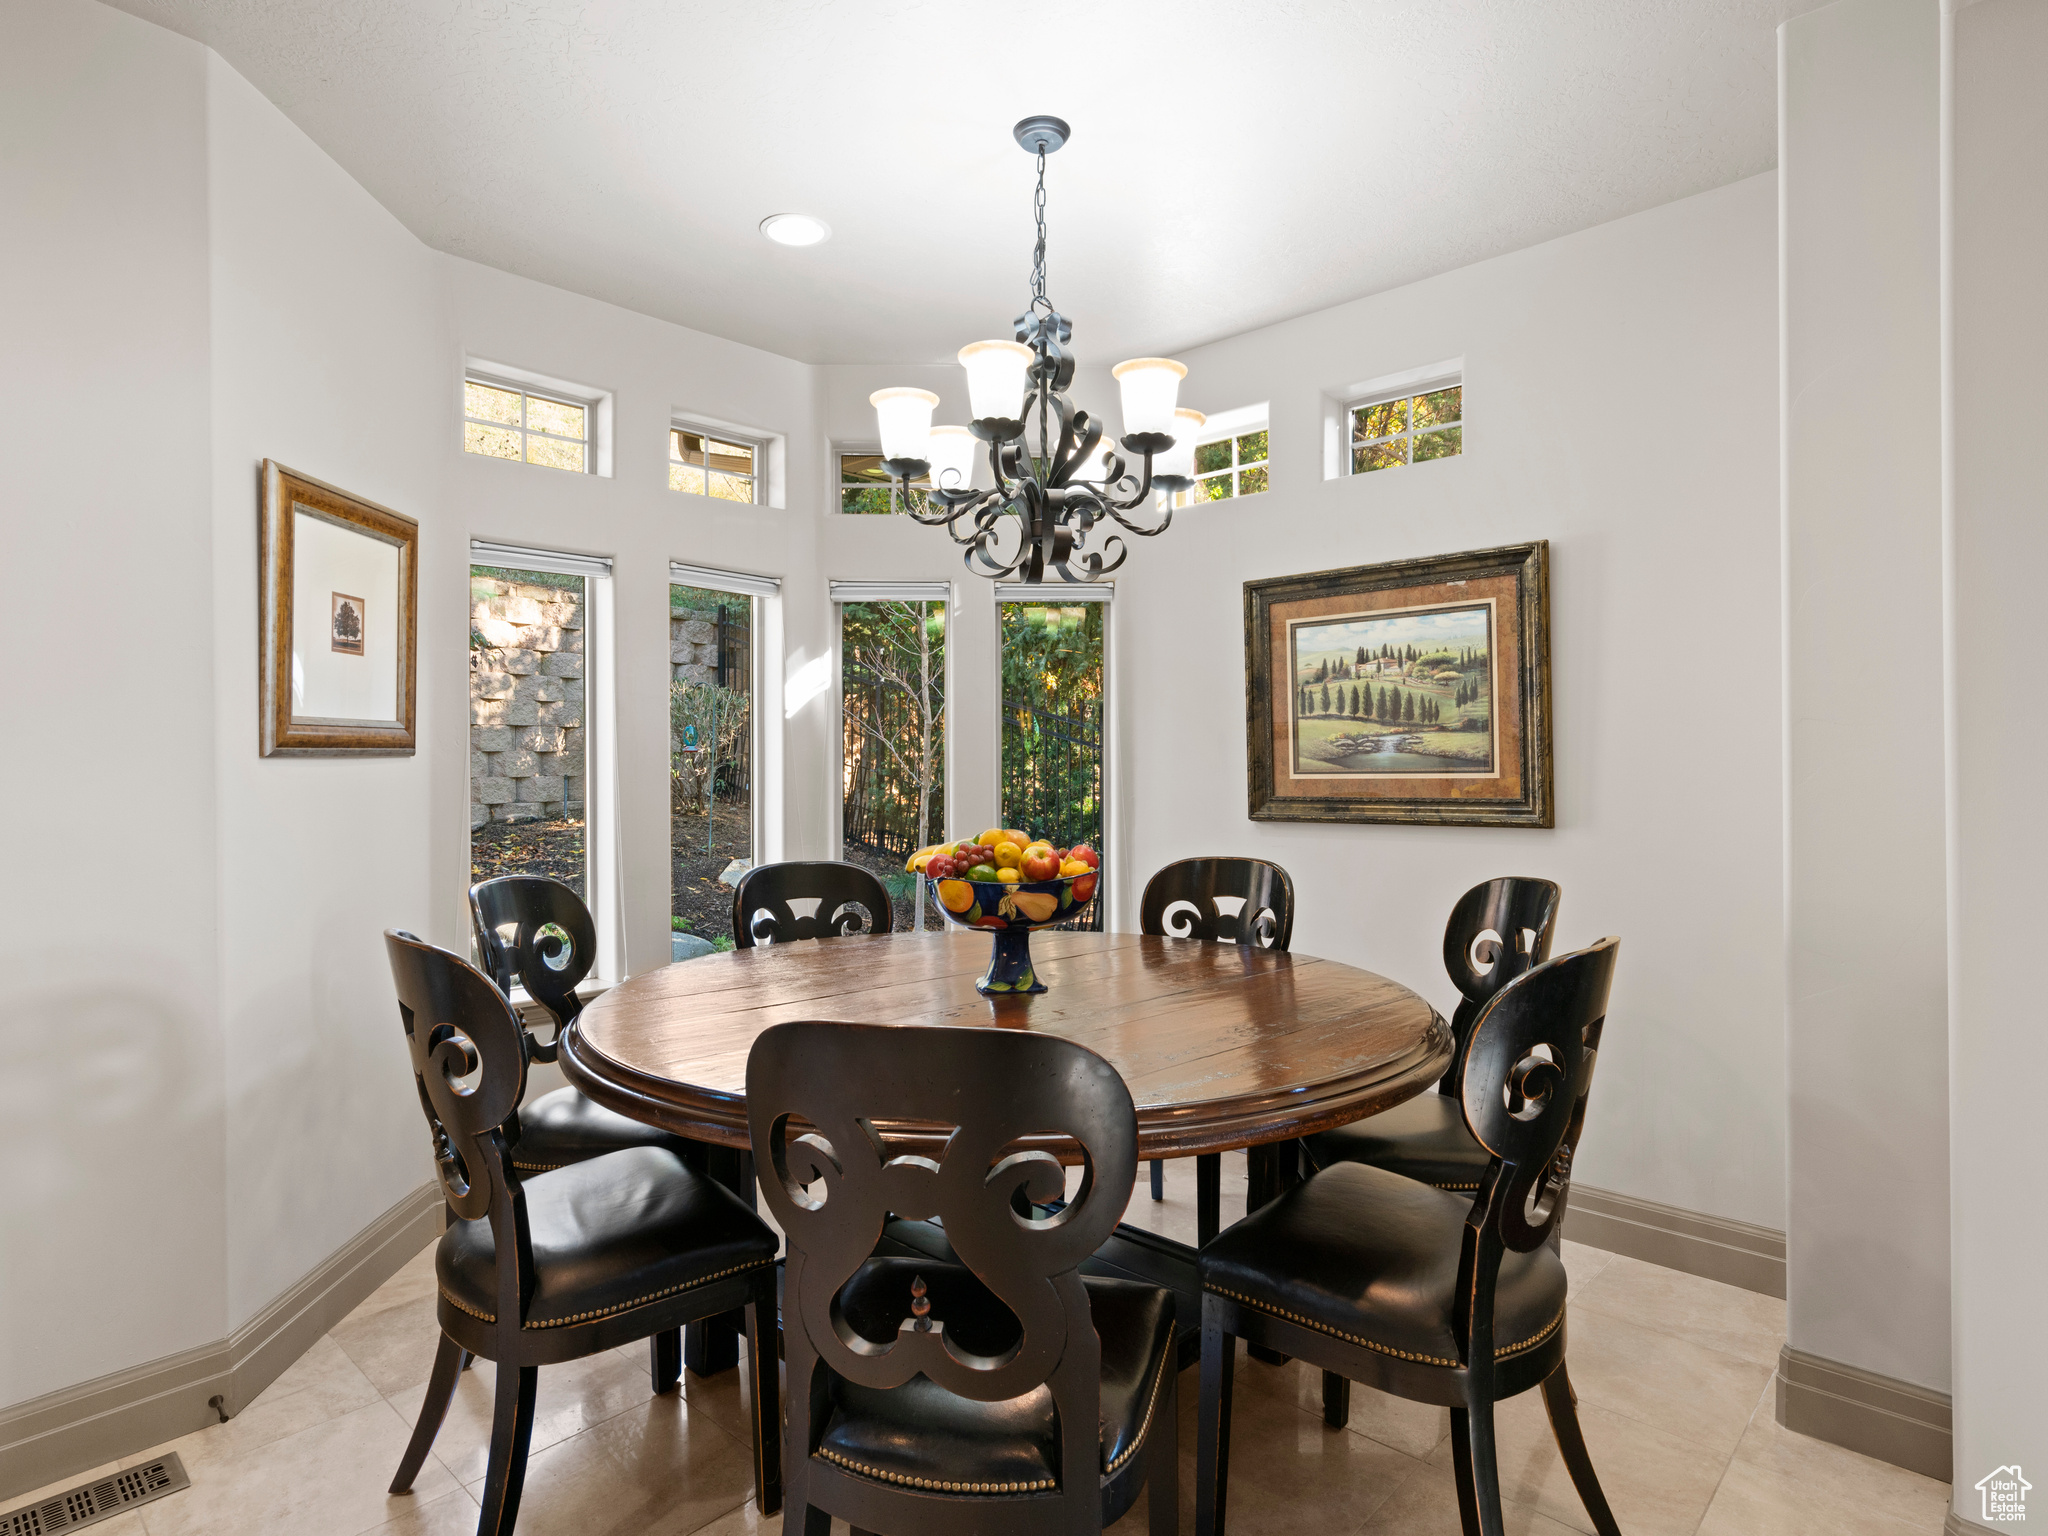 Dining room with light tile floors and plenty of natural light